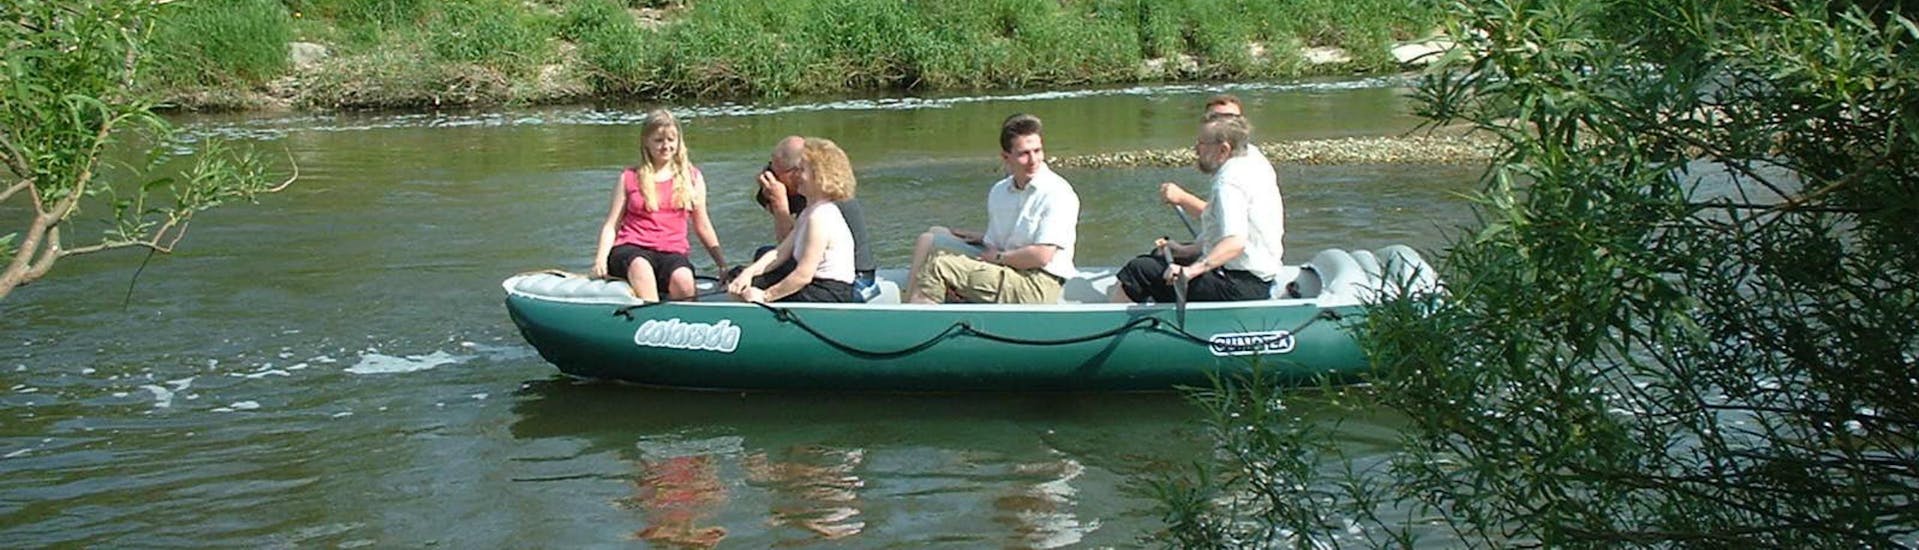 People in a raft while Rafting on the Neisse River from Rothenburg - Short Tour with Neisse Tours Rothenburg.